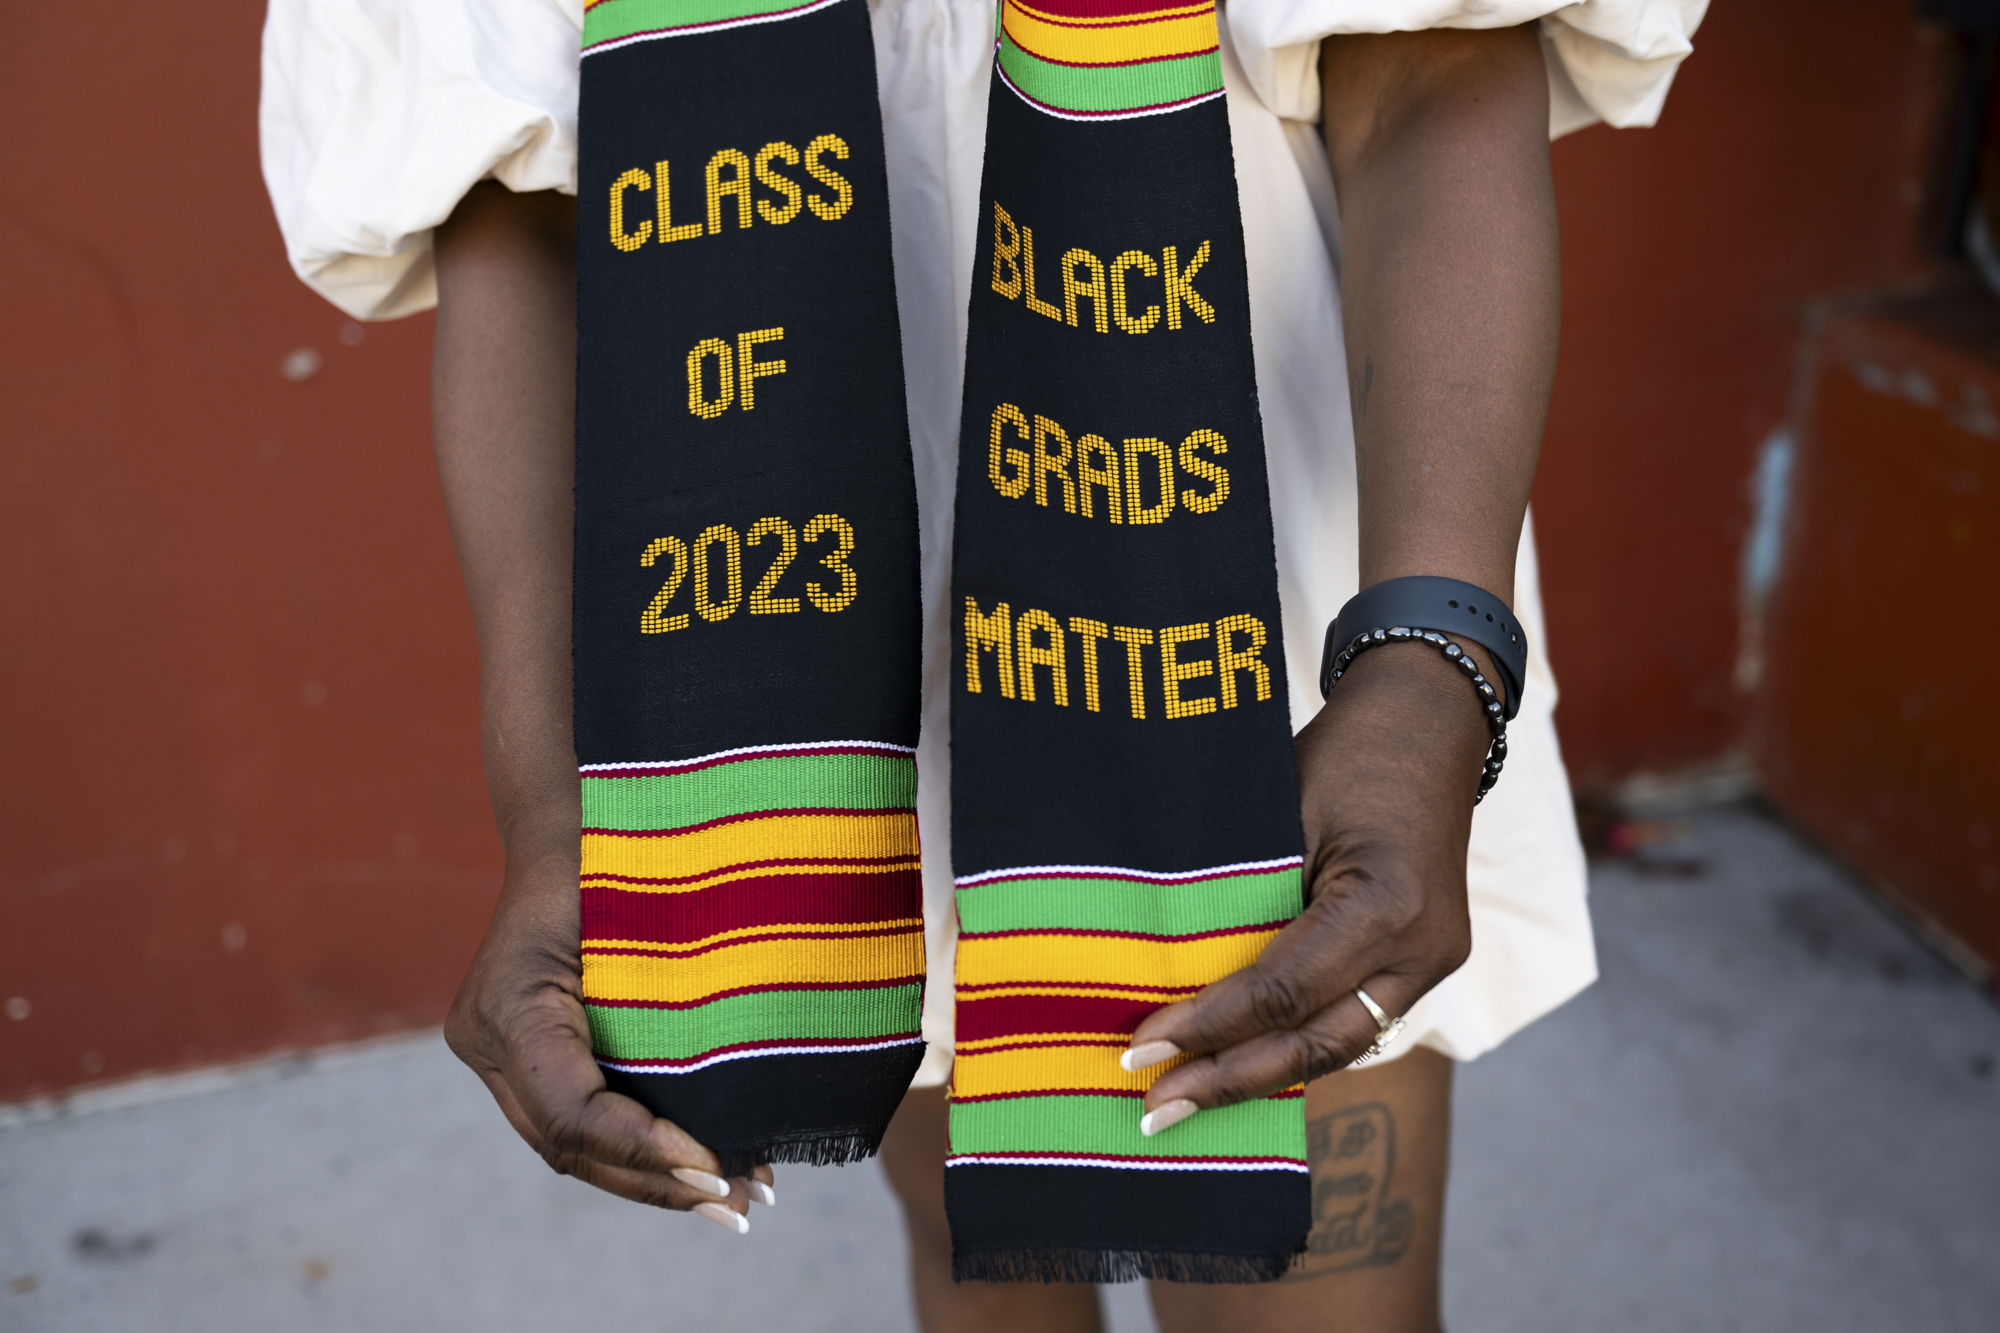 A black, green, yellow and red striped graduation stole with the words "Class of 2023" and "Black Grads Matter" written on it.